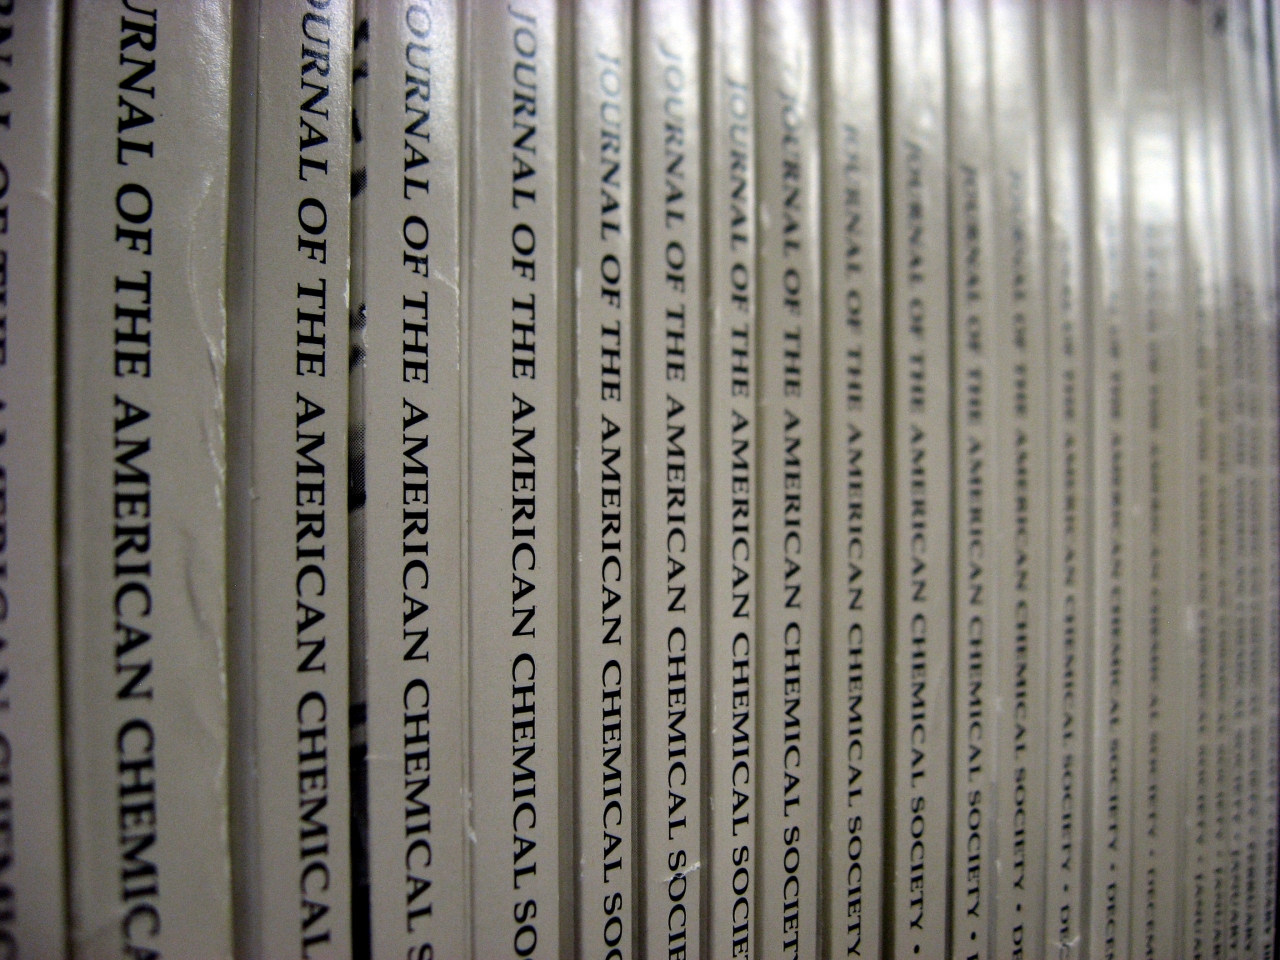 Issues of the Journal of the American Chemical Society in the research library.